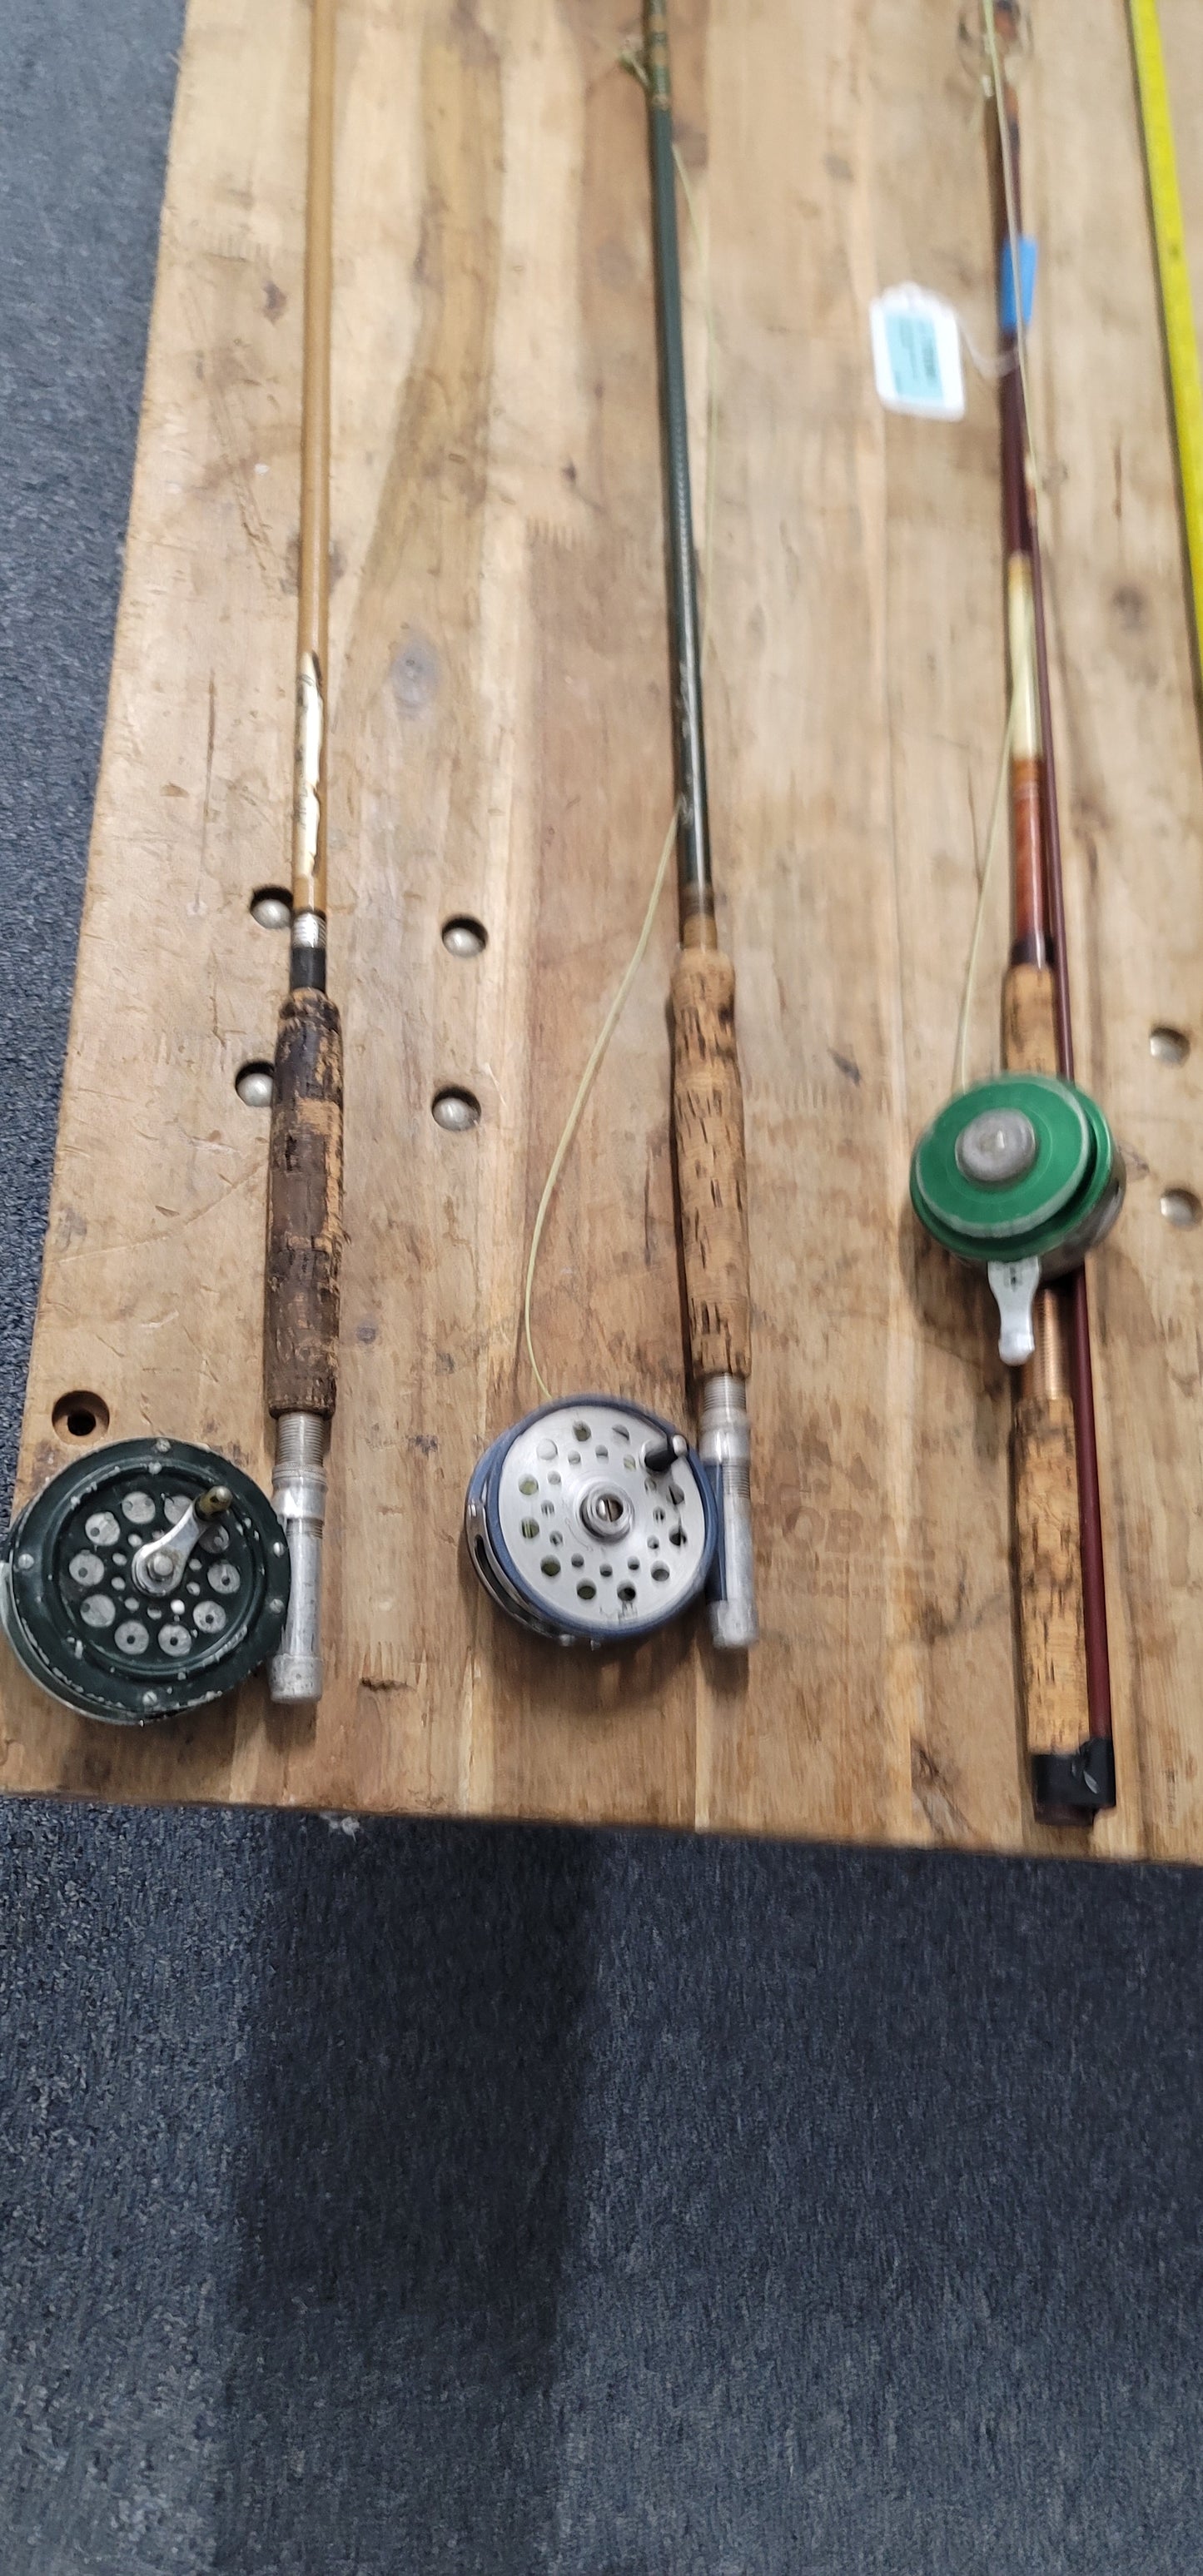 Vintage fly fishing rods with reels